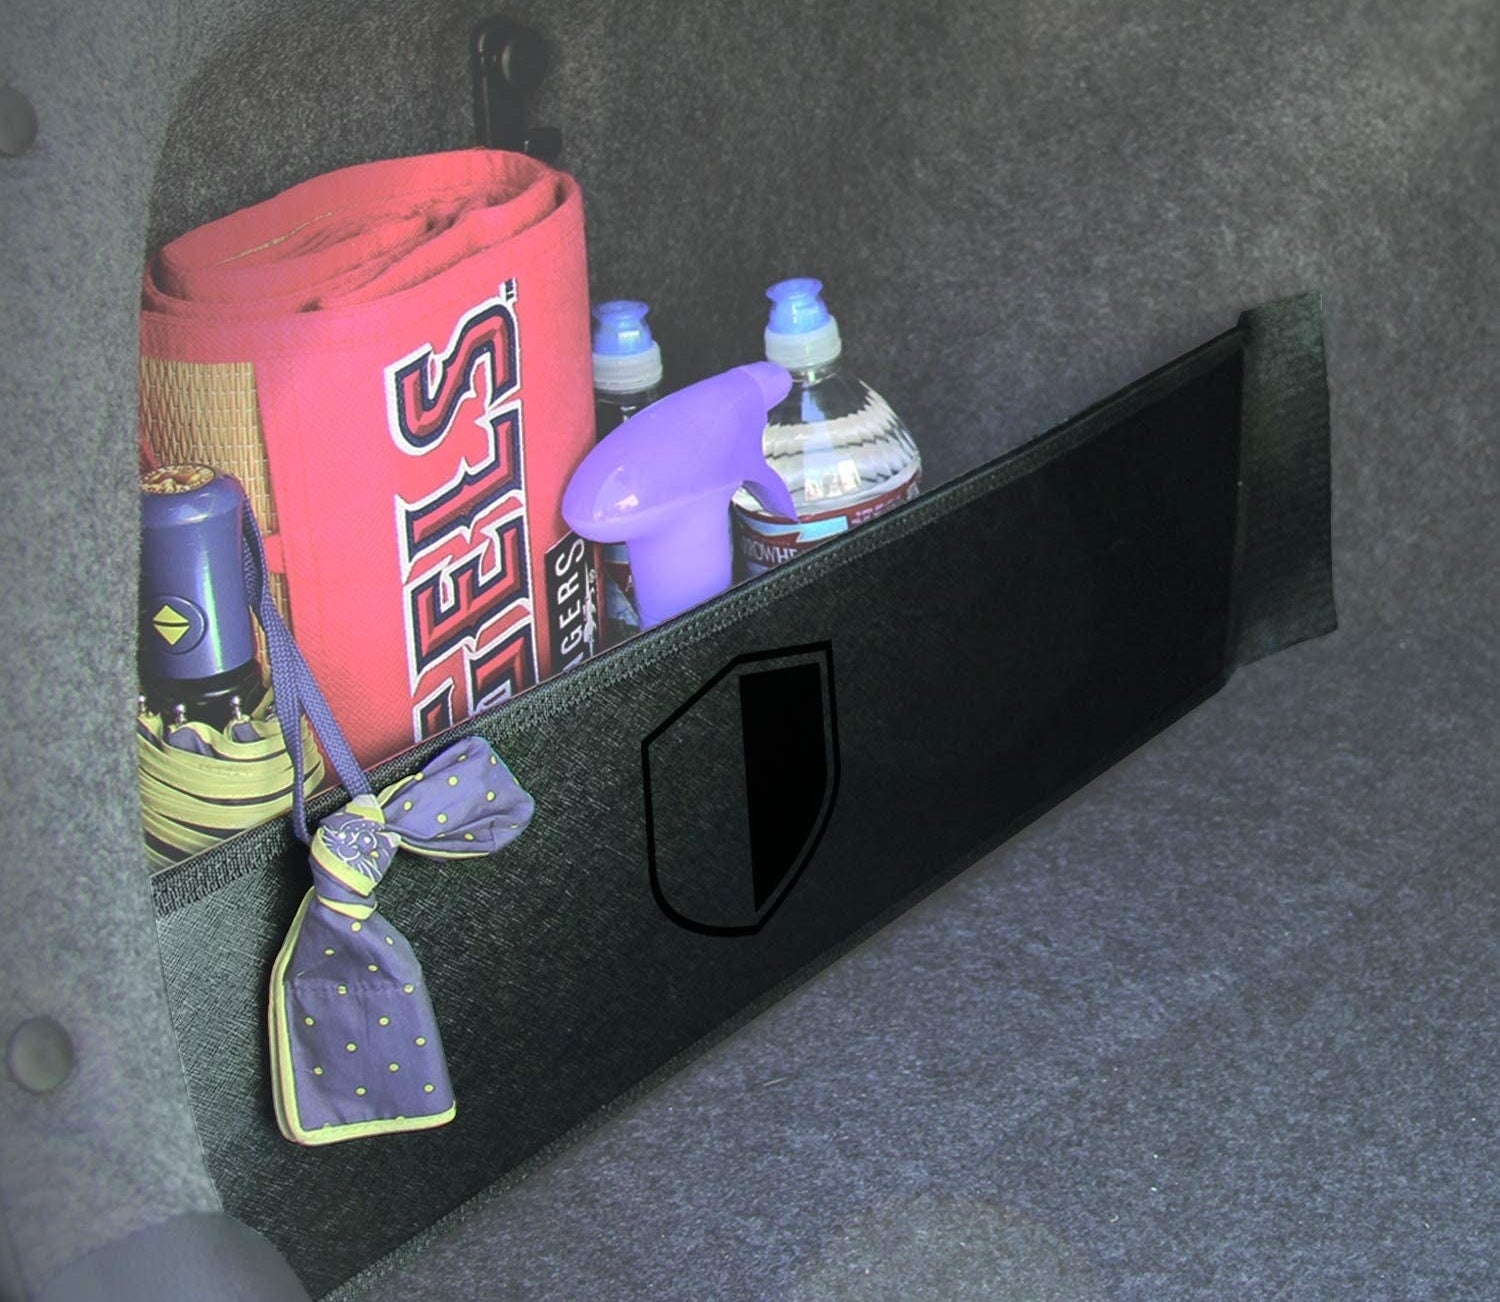 the velcro organizer attached to the side of a car trunk